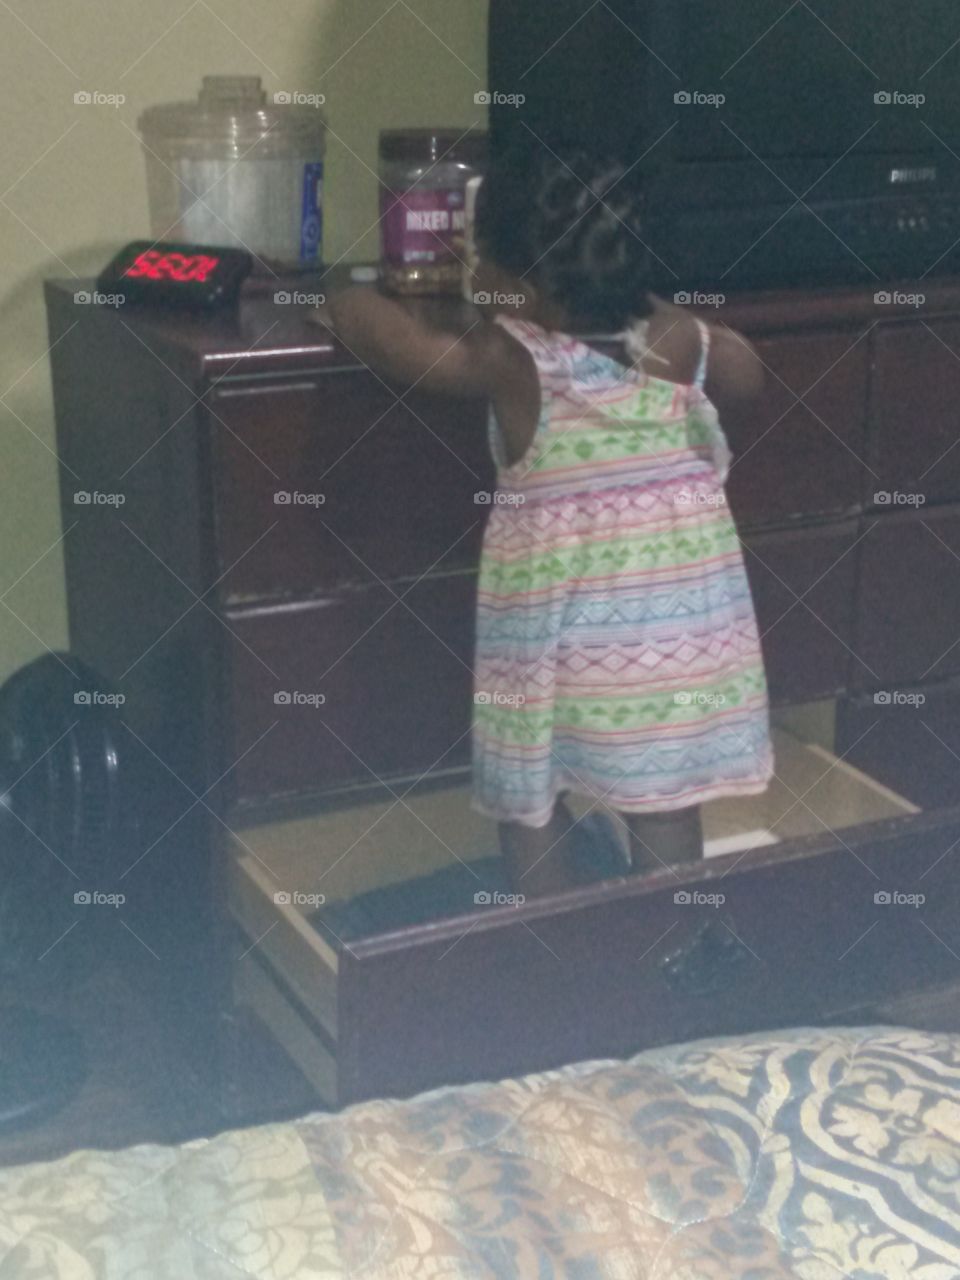 my baby girl climbing in drawer get some candy and peanuts off the